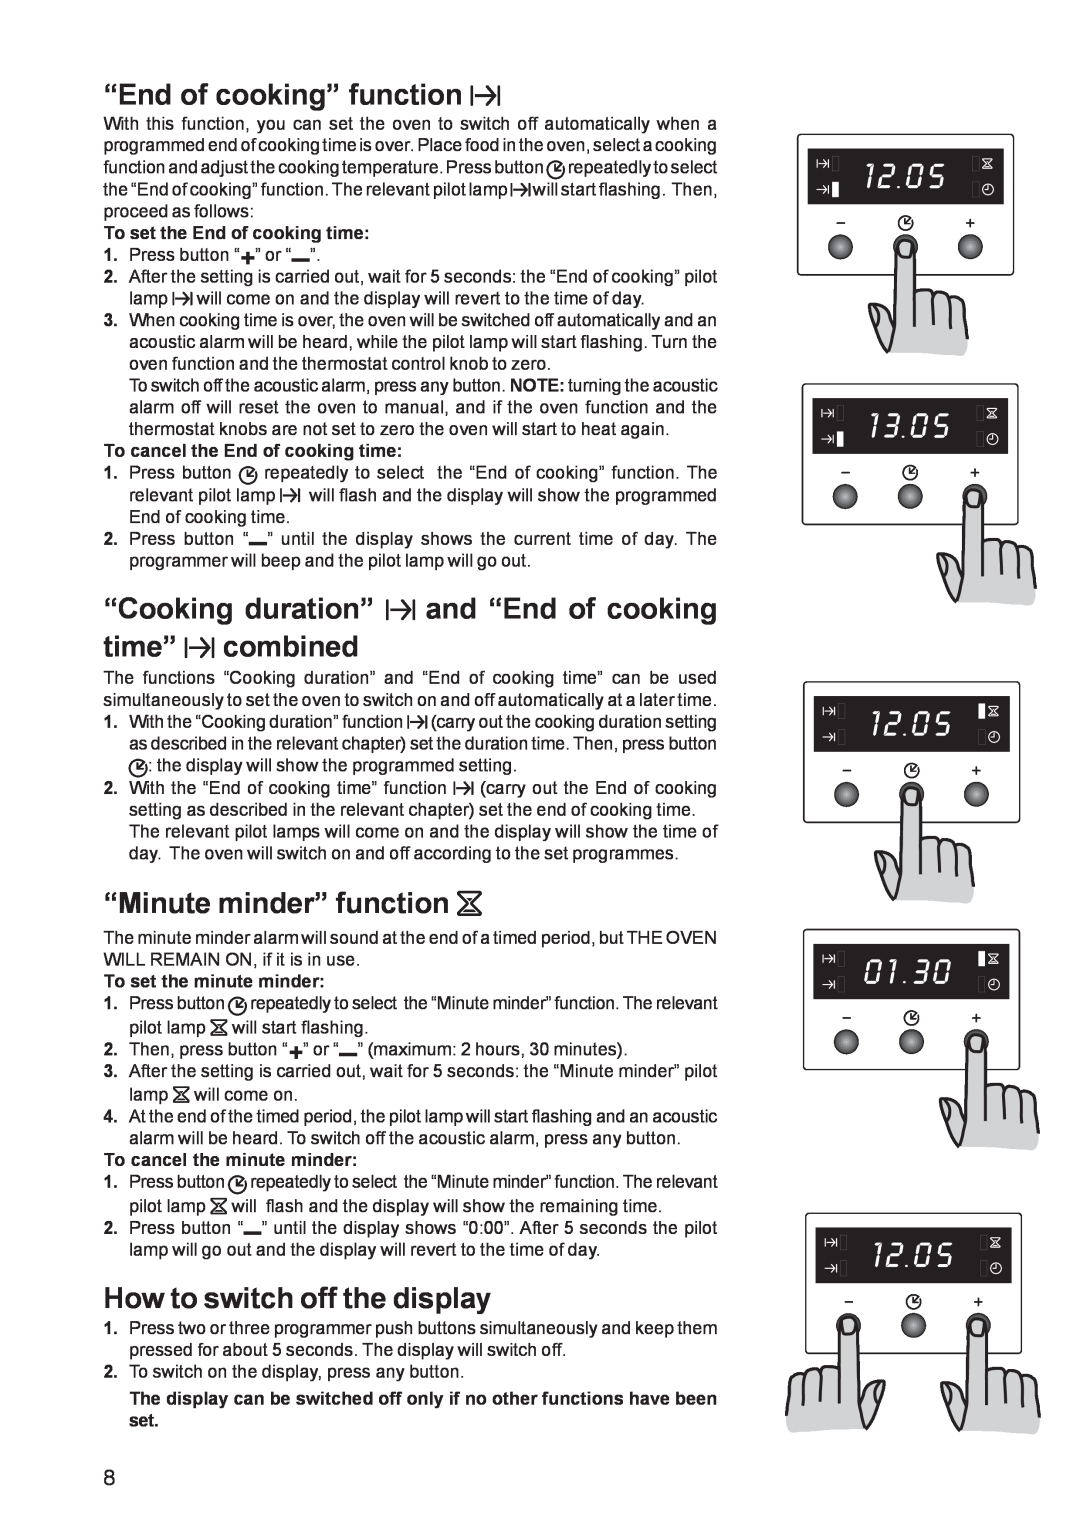 Zanussi ZBS863 “End of cooking” function, “Cooking duration” and “End of cooking time” combined, “Minute minder” function 